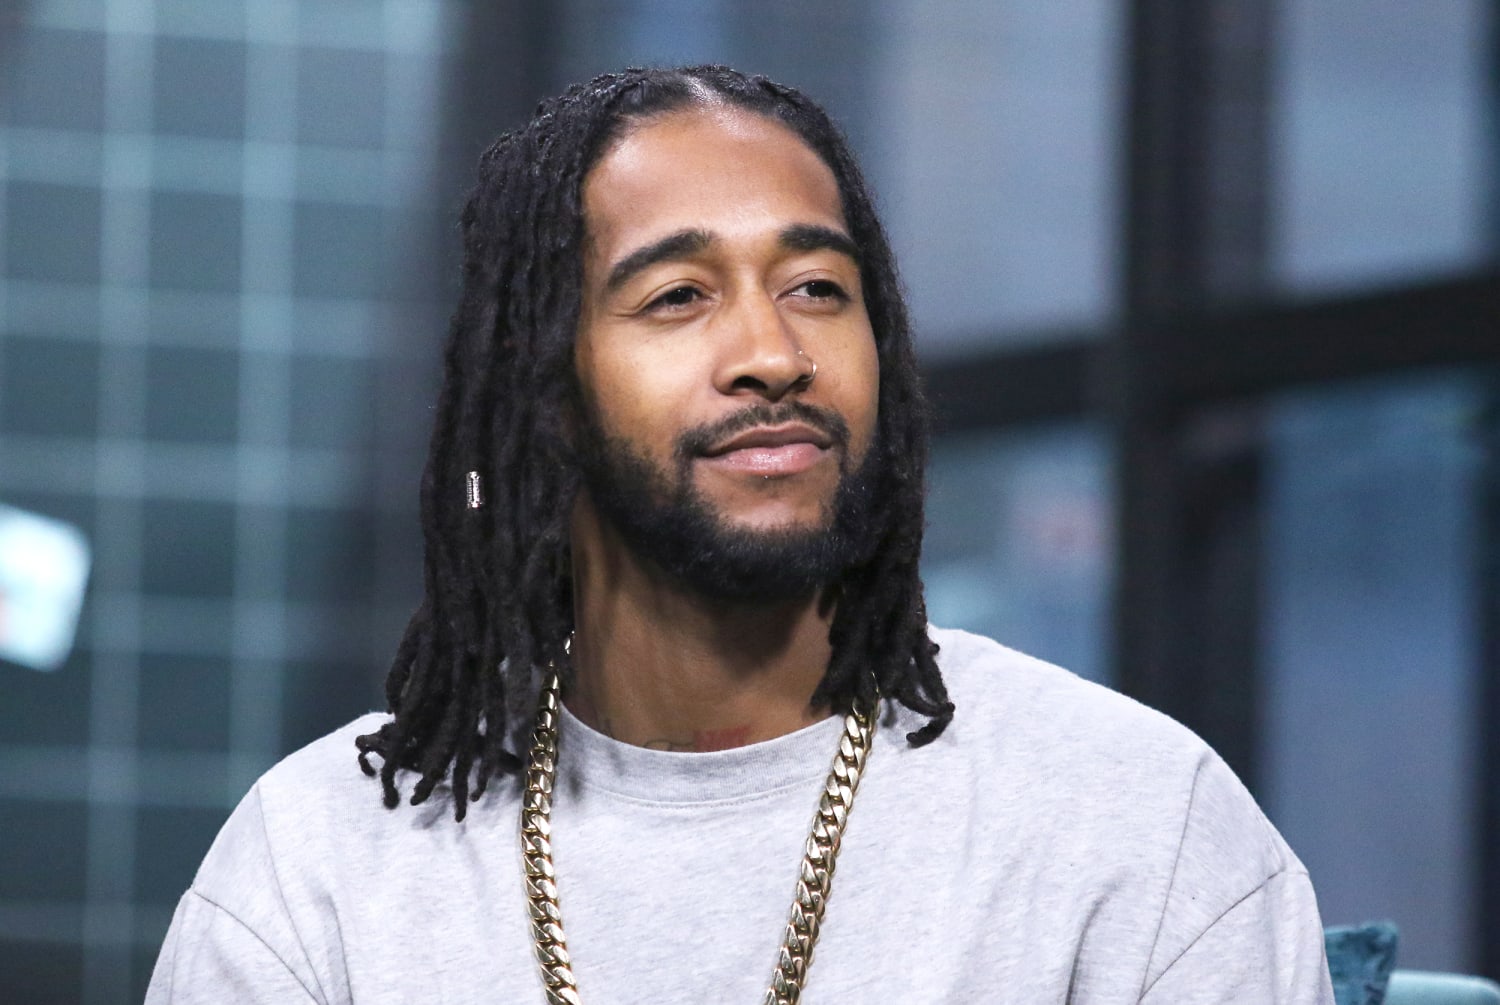 Singer Omarion addresses jokes comparing his name to omicron: ‘I am an artist, not a variant’